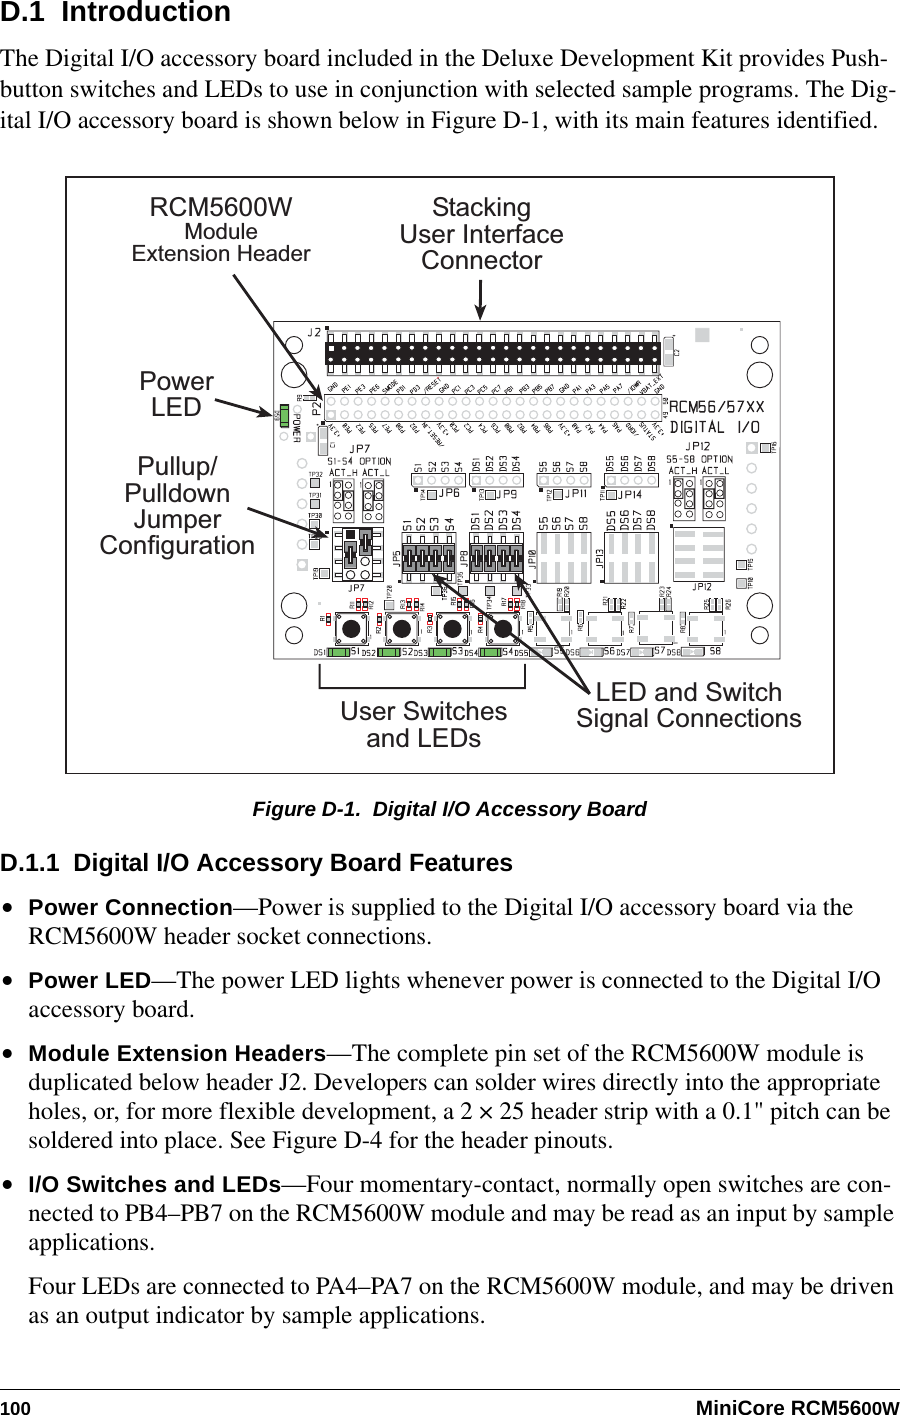 100 MiniCore RCM5600WD.1  IntroductionThe Digital I/O accessory board included in the Deluxe Development Kit provides Push-button switches and LEDs to use in conjunction with selected sample programs. The Dig-ital I/O accessory board is shown below in Figure D-1, with its main features identified.Figure D-1.  Digital I/O Accessory BoardD.1.1  Digital I/O Accessory Board Features•Power Connection—Power is supplied to the Digital I/O accessory board via the RCM5600W header socket connections.•Power LED—The power LED lights whenever power is connected to the Digital I/O accessory board.•Module Extension Headers—The complete pin set of the RCM5600W module is duplicated below header J2. Developers can solder wires directly into the appropriate holes, or, for more flexible development, a 2 × 25 header strip with a 0.1&quot; pitch can be soldered into place. See Figure D-4 for the header pinouts.•I/O Switches and LEDs—Four momentary-contact, normally open switches are con-nected to PB4–PB7 on the RCM5600W module and may be read as an input by sample applications.Four LEDs are connected to PA4–PA7 on the RCM5600W module, and may be driven as an output indicator by sample applications.PowerLEDRCM5600WModuleExtension HeaderUser Switchesand LEDsPullup/PulldownJumperConfigurationLED and SwitchSignal ConnectionsStackingUser InterfaceConnector